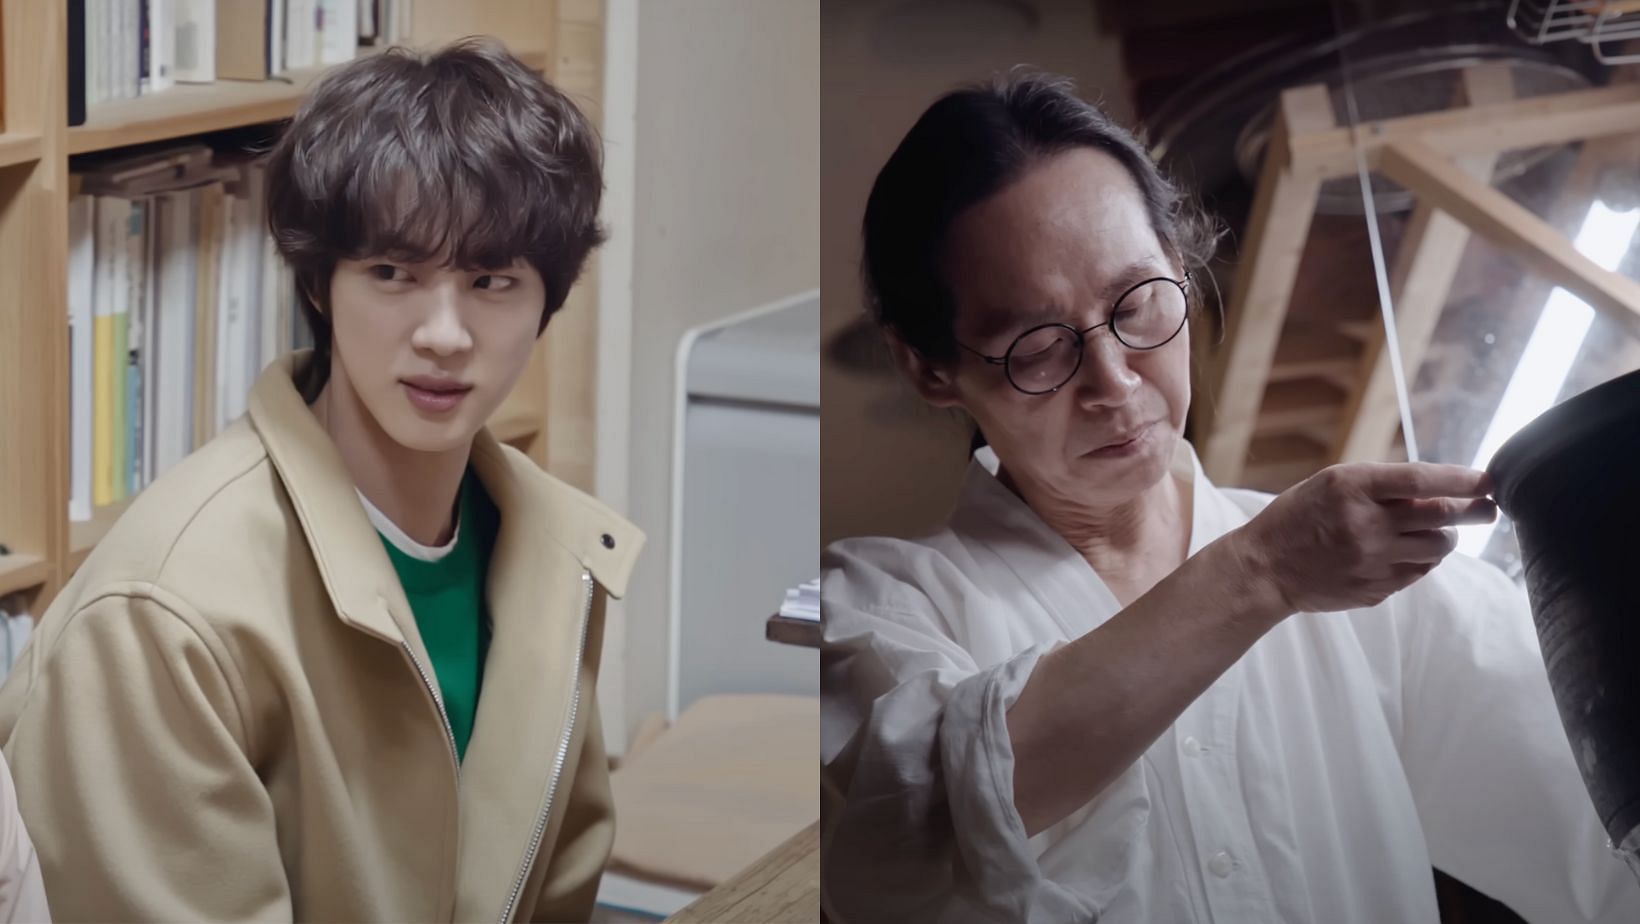 Director Park Rokdam shares a Facebook update on BTS&rsquo; Kim Seokjin and his &lsquo;Honey Jar of Butterfly&rsquo; journey. (Images via YouTube/BANGTANTV)